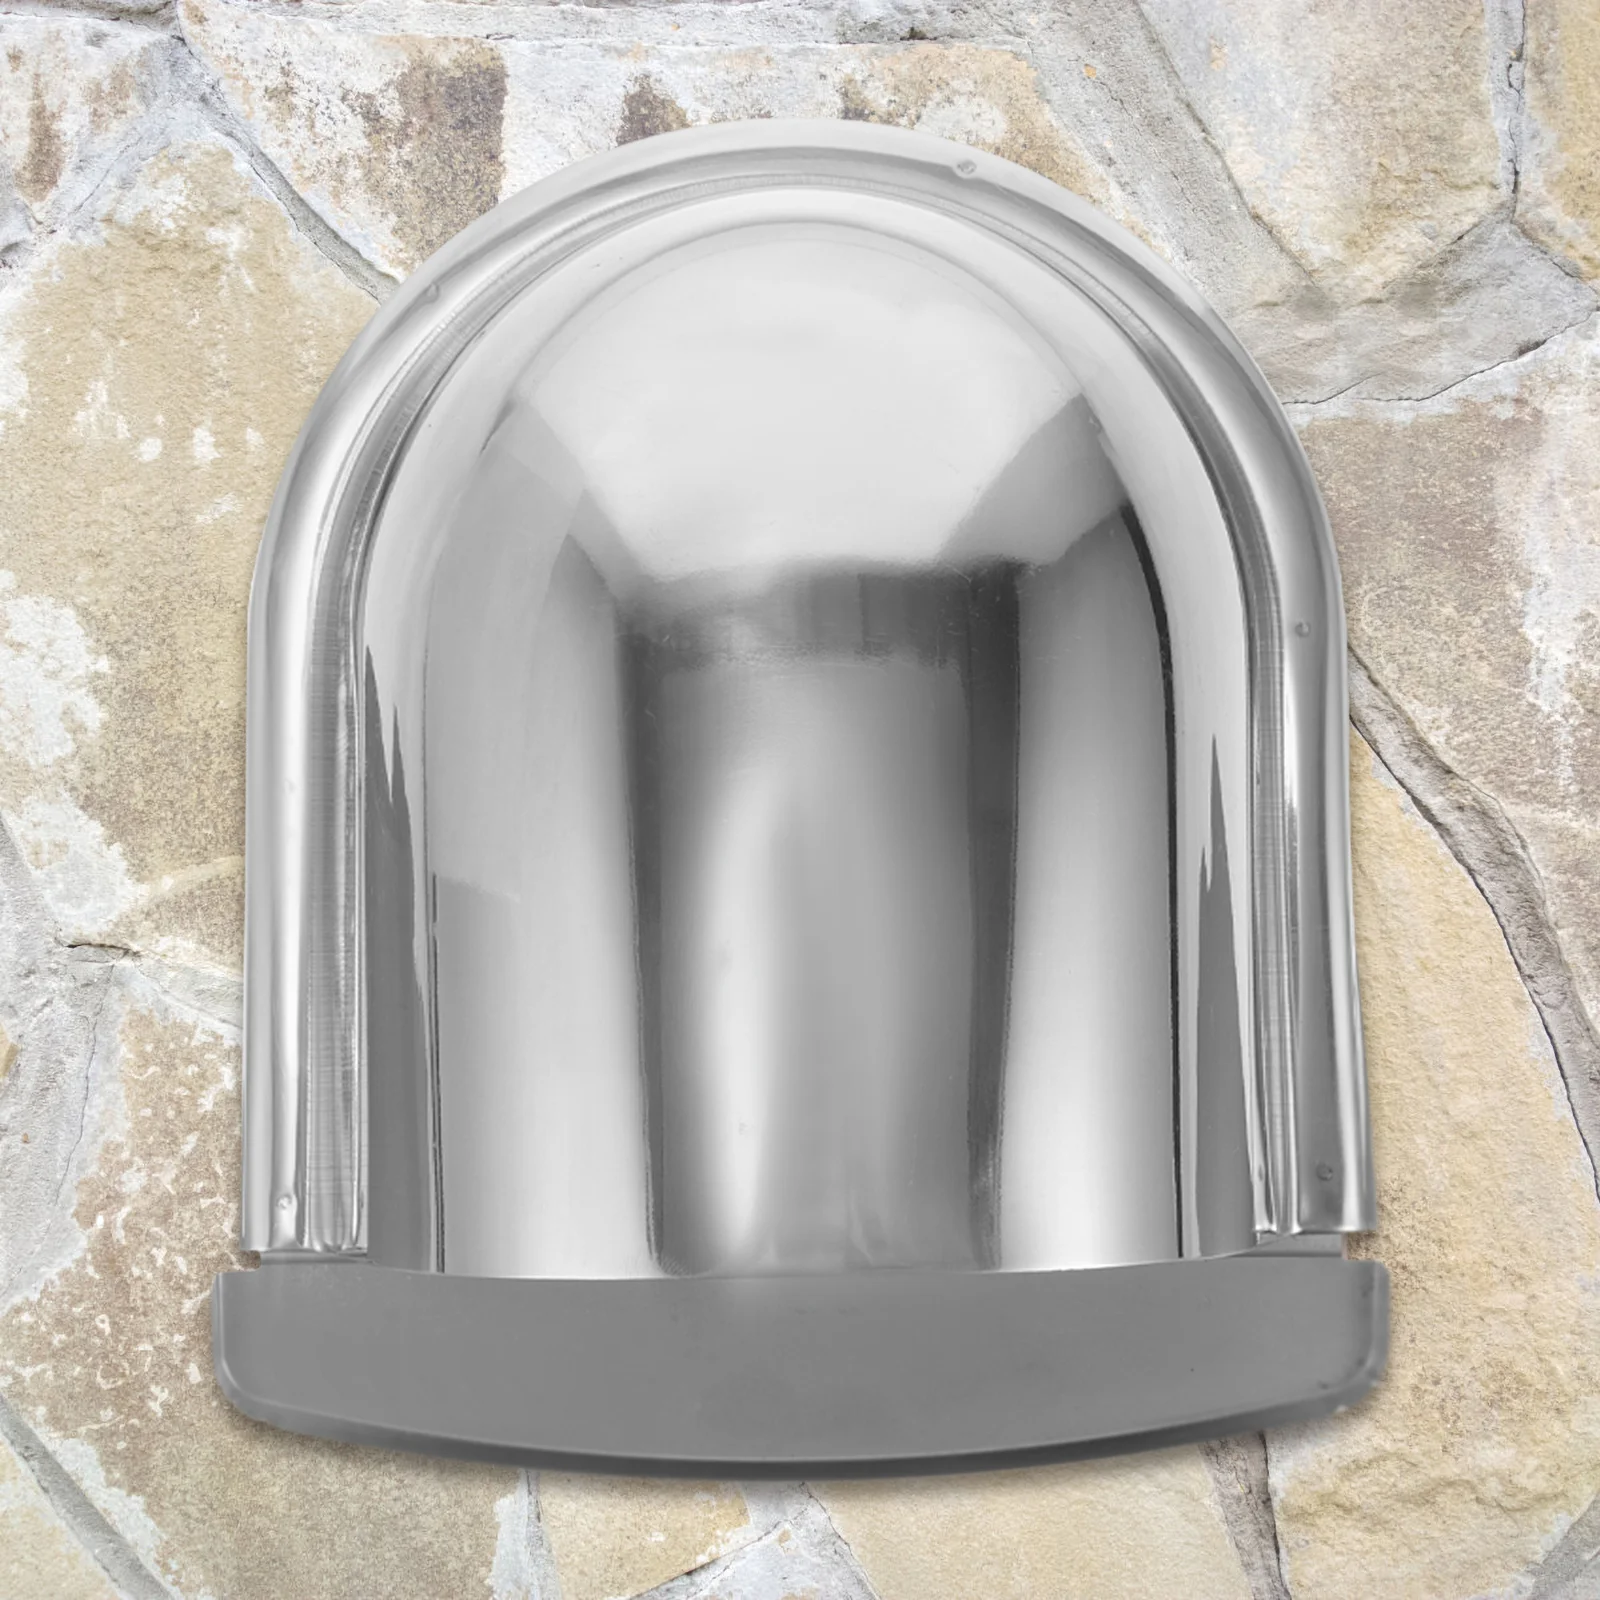 

Roof Rain Hat Fireplace Funnel Protector Range Hood Round Rainproof Cap Smokestack Cover Vent 201 Stainless Steel Chimney Caps